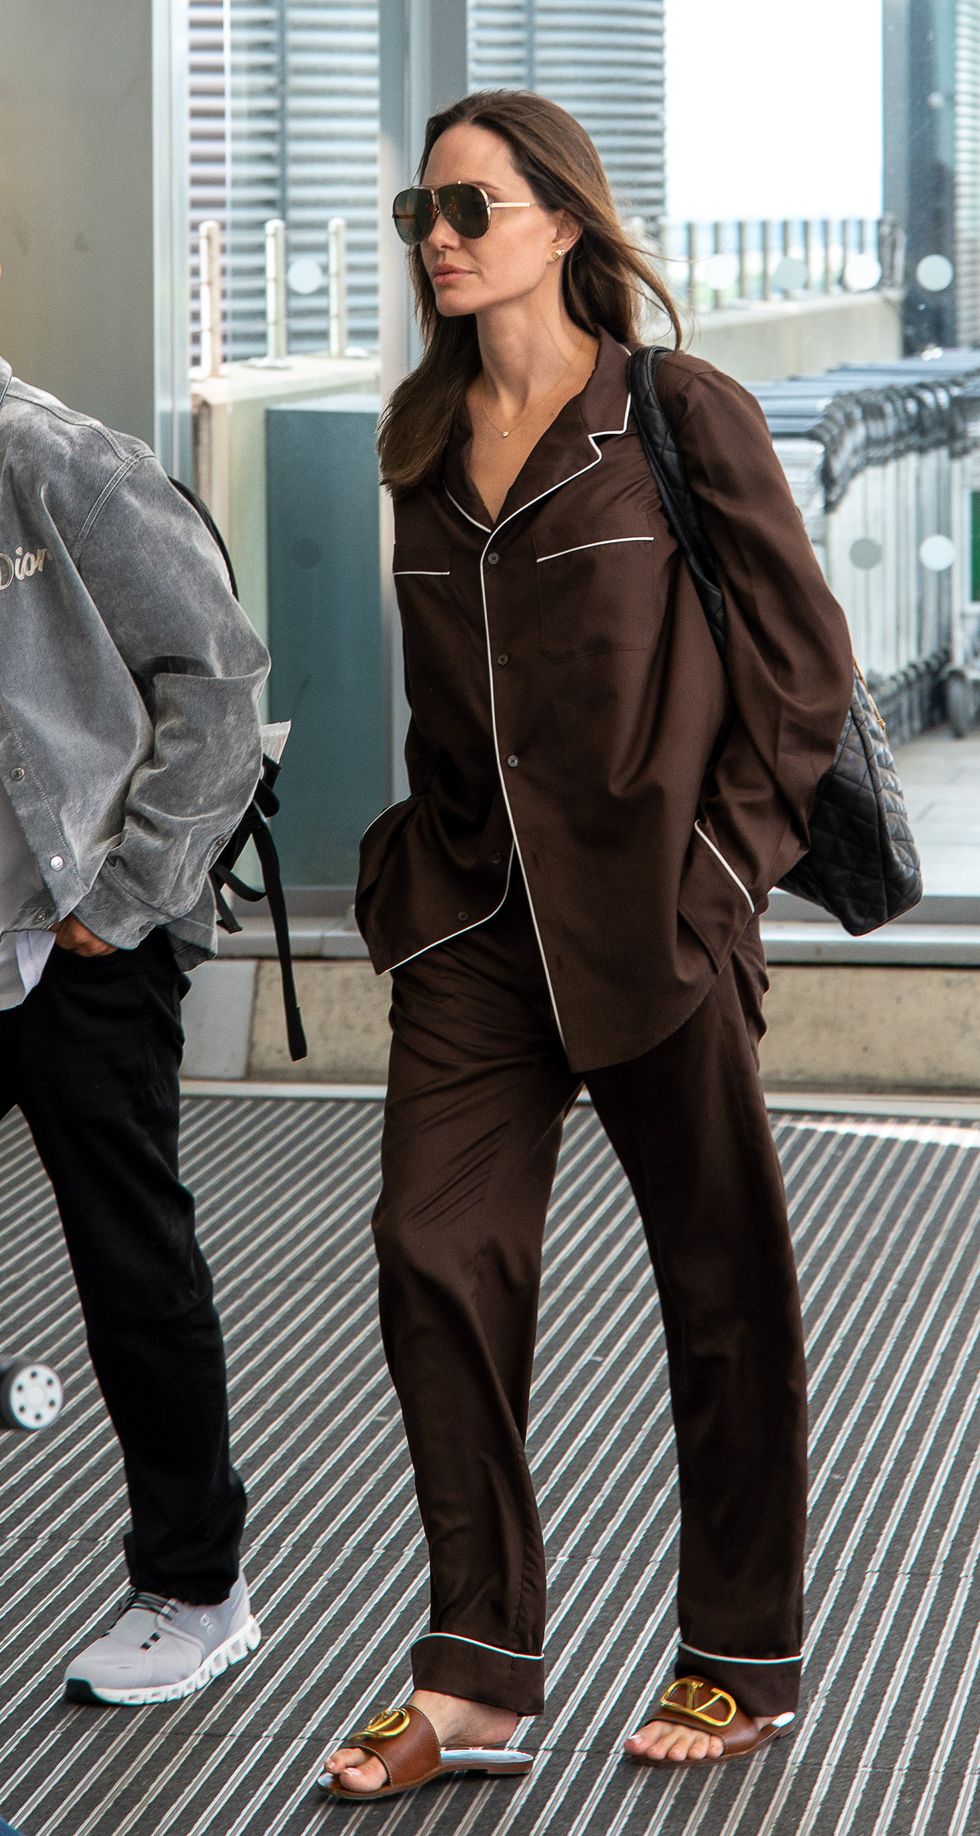 Hailey Bieber's Boring Airport Outfit Is So 2019